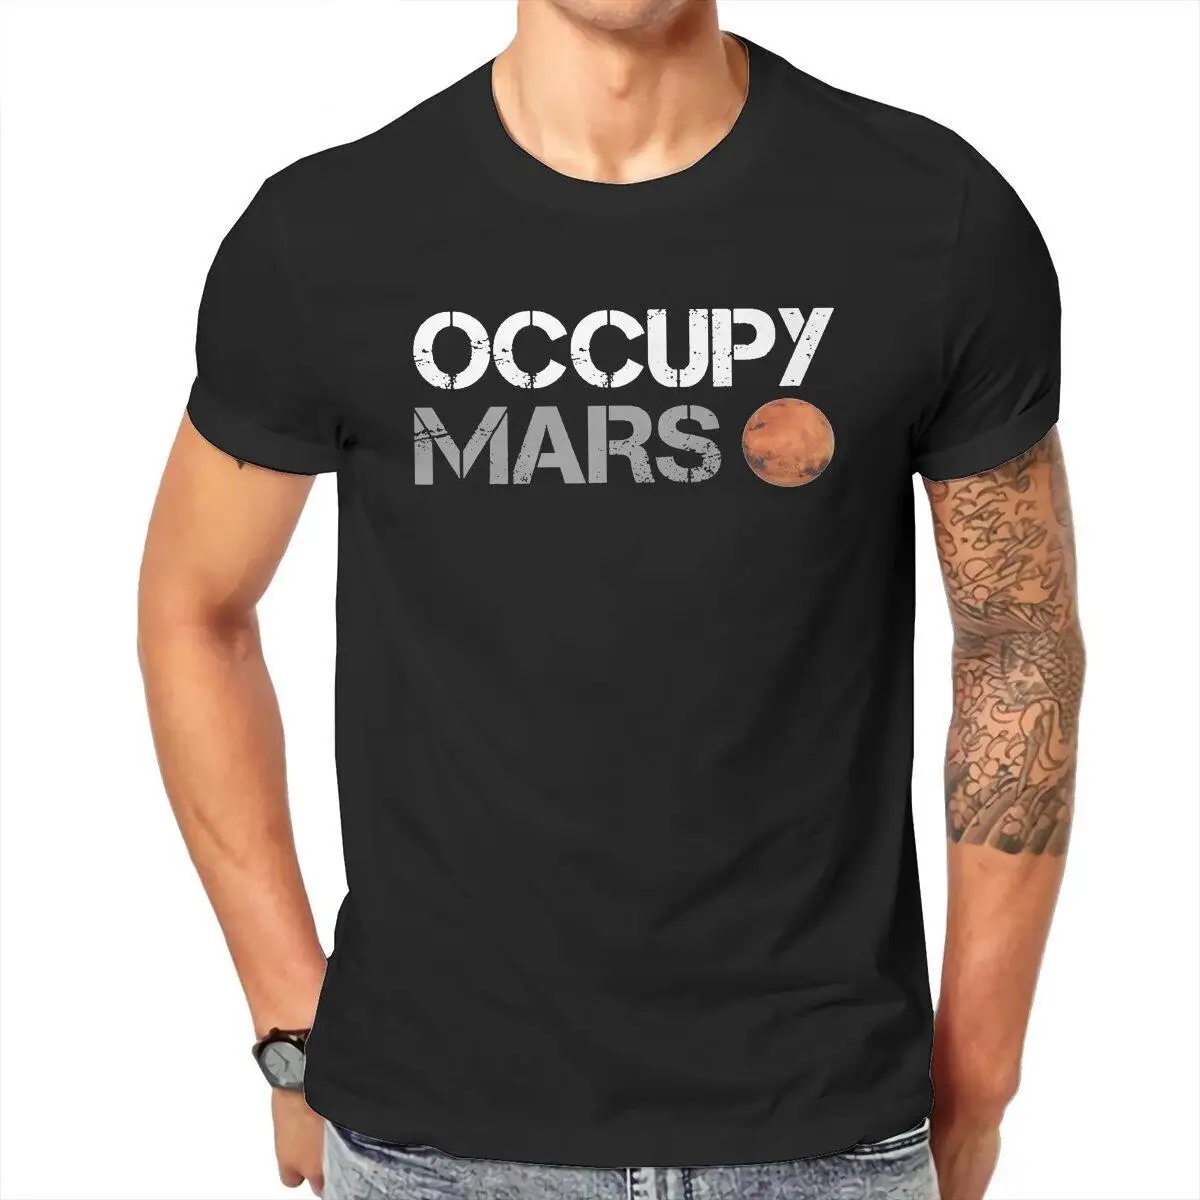 Novelty Occupy Mars Minimal Design T-Shirt for Men Crew Neck Pure Cotton T Shirt SpaceX Elon Musk Short Sleeve Tees Graphic Tops